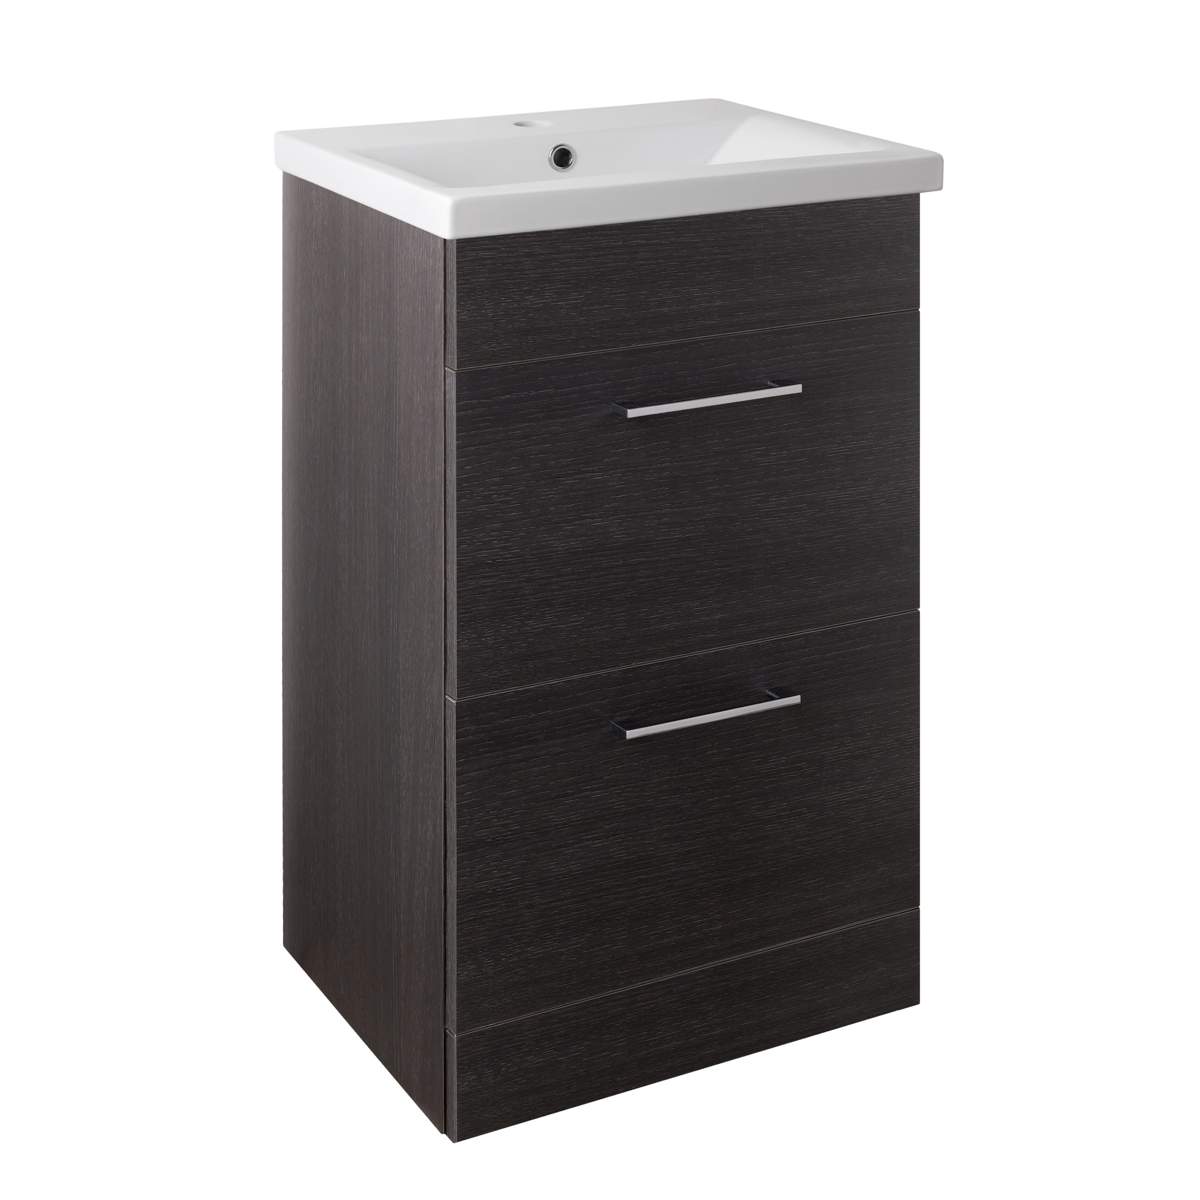 JTP Pace Units 500mm Floor Standing Unit with Drawers and Basin in Black (PFS501BK + P500BS)